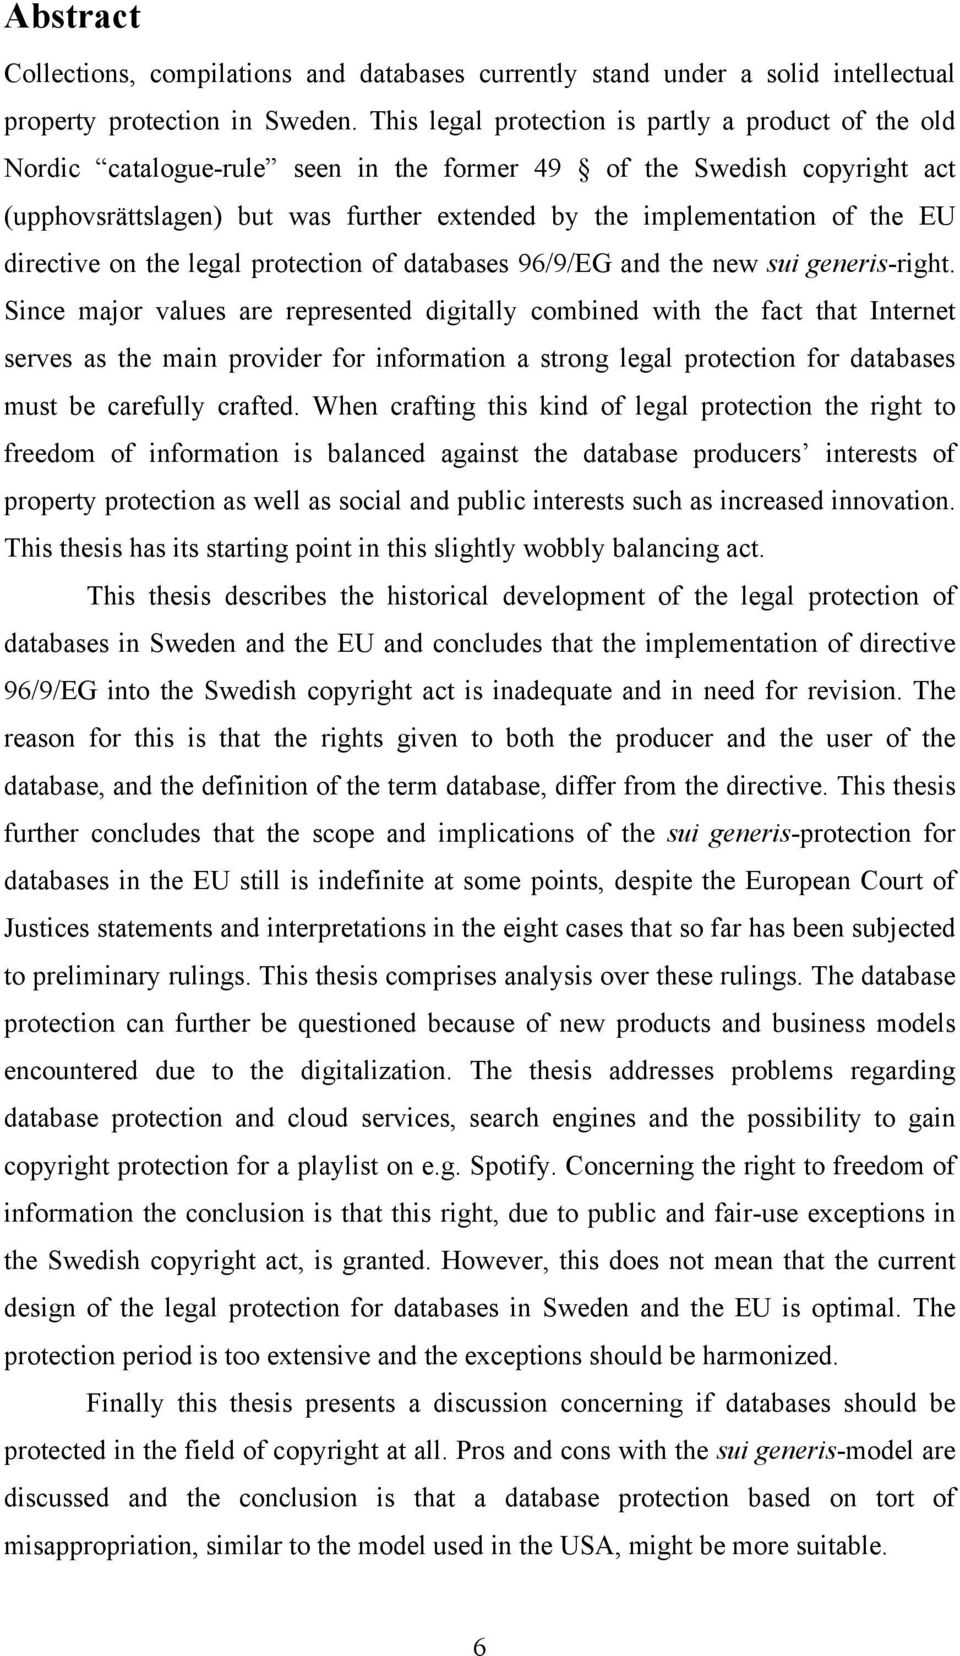 EU directive on the legal protection of databases 96/9/EG and the new sui generis-right.